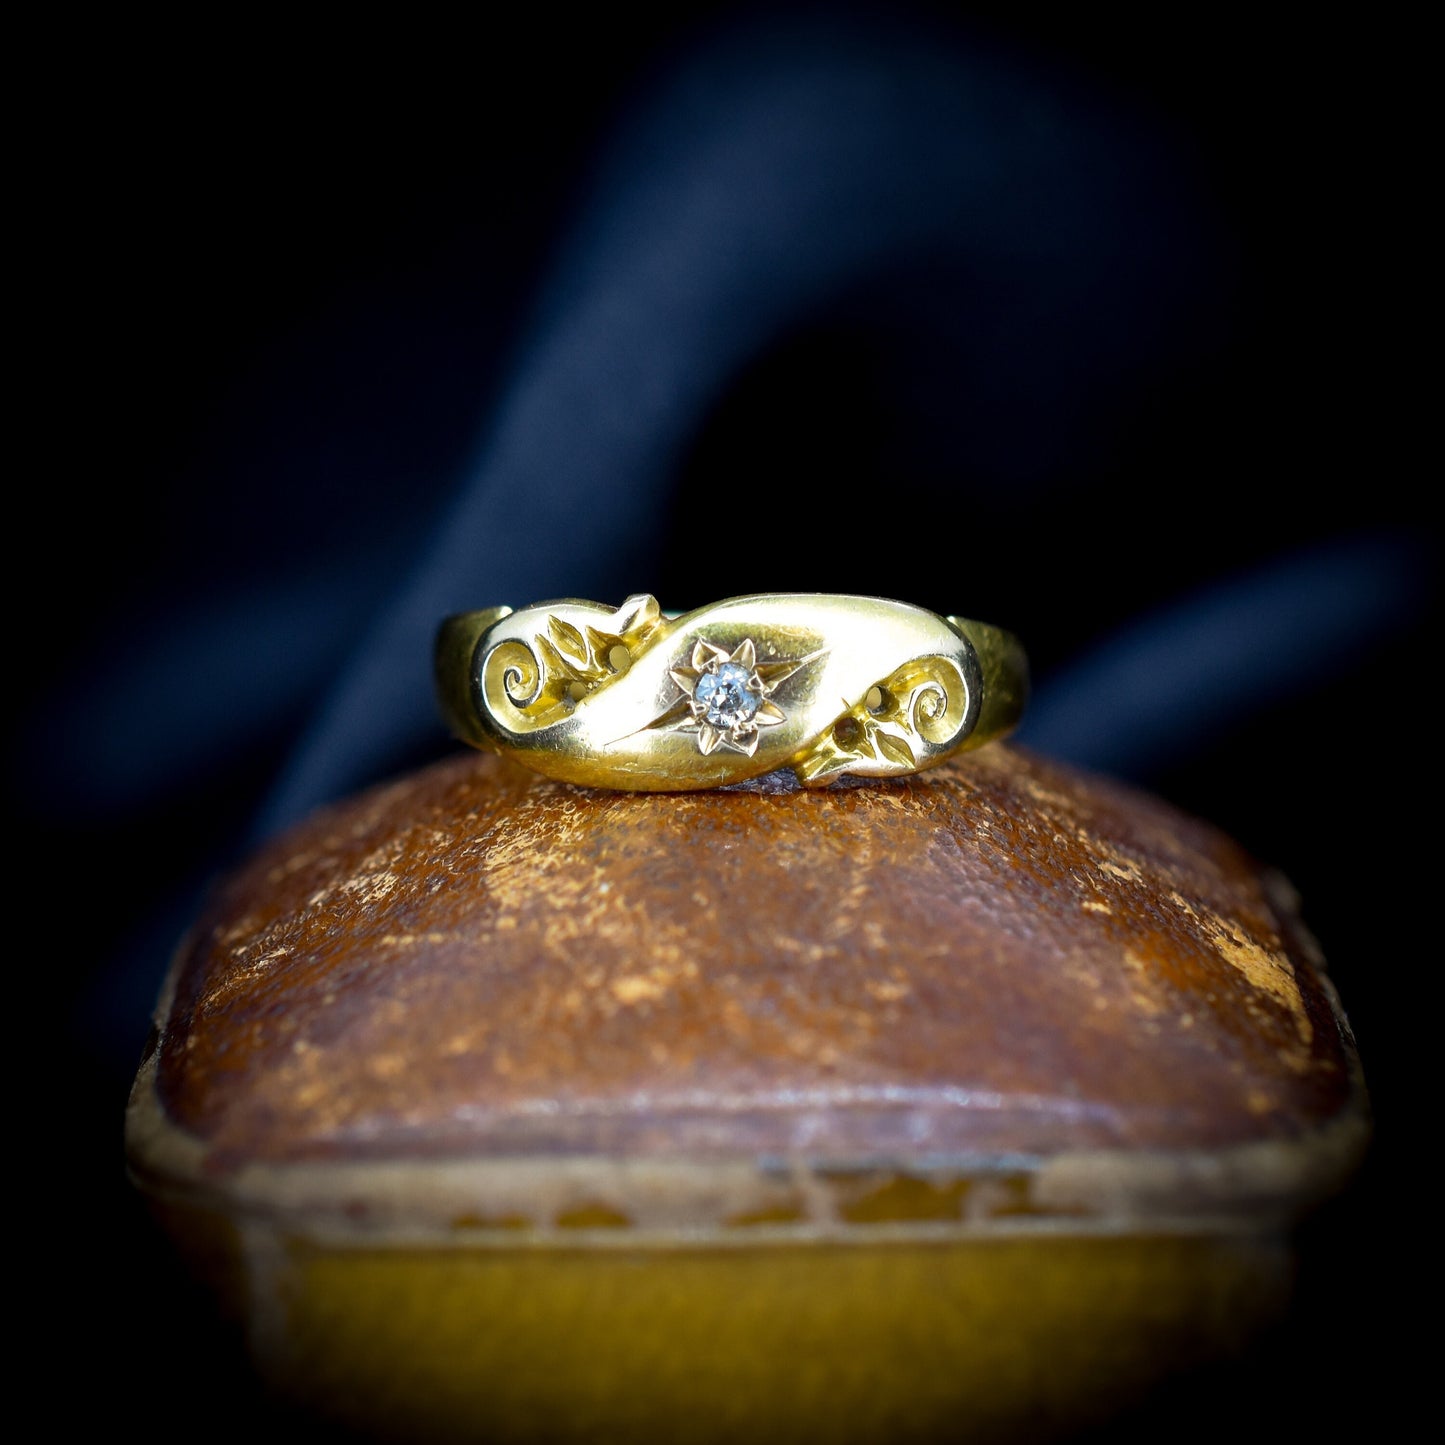 Antique Diamond Starburst 18ct Gold Gypsy Band Ring | Dated 1901